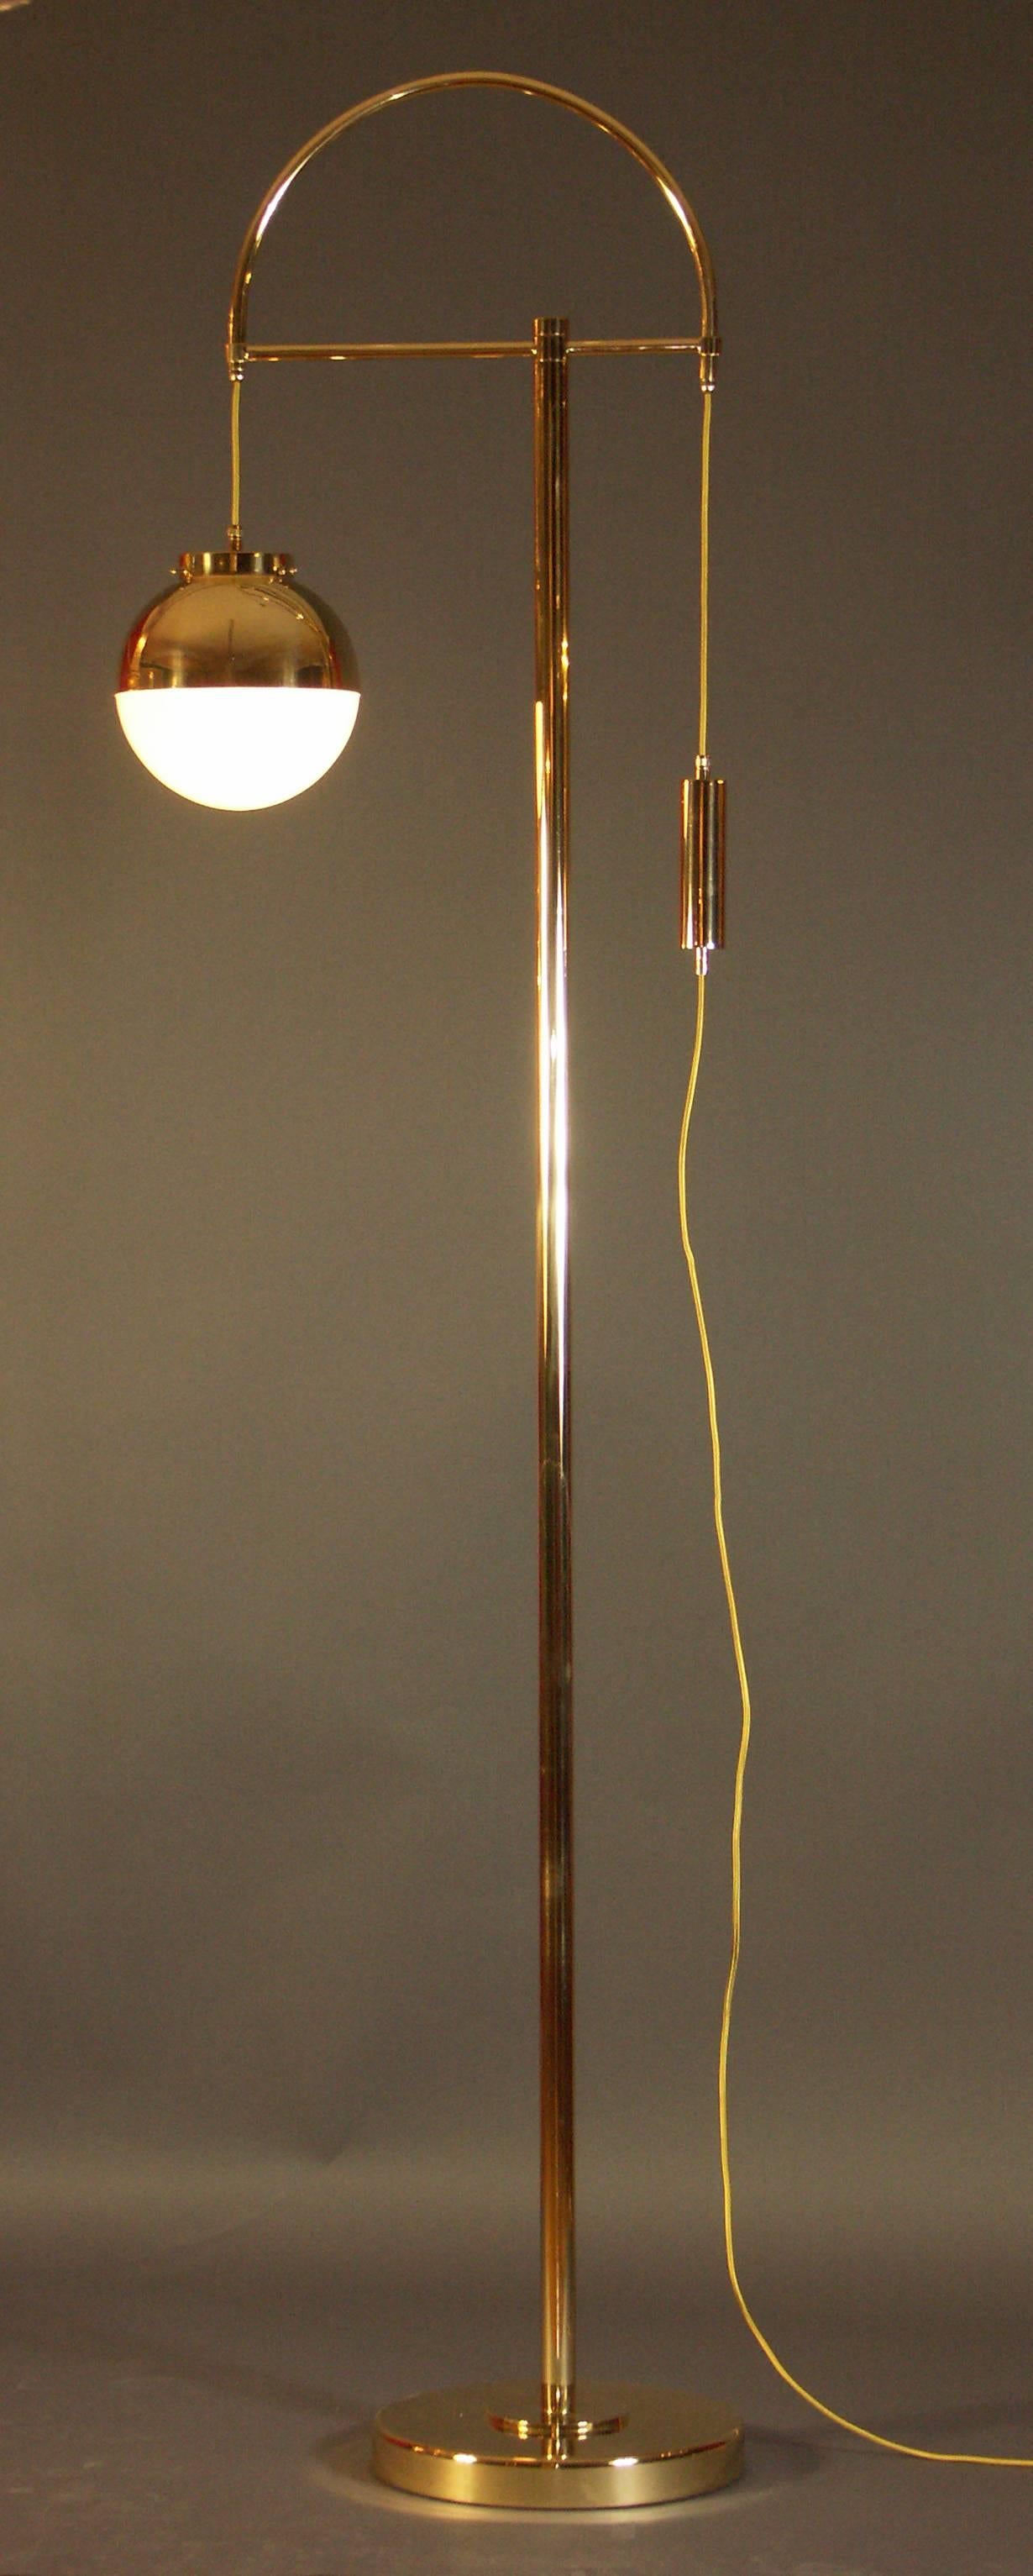 Hand-Crafted Art Deco, Art Nouveau Lift Floor Lamp Adjustable in Height, Re Edition For Sale